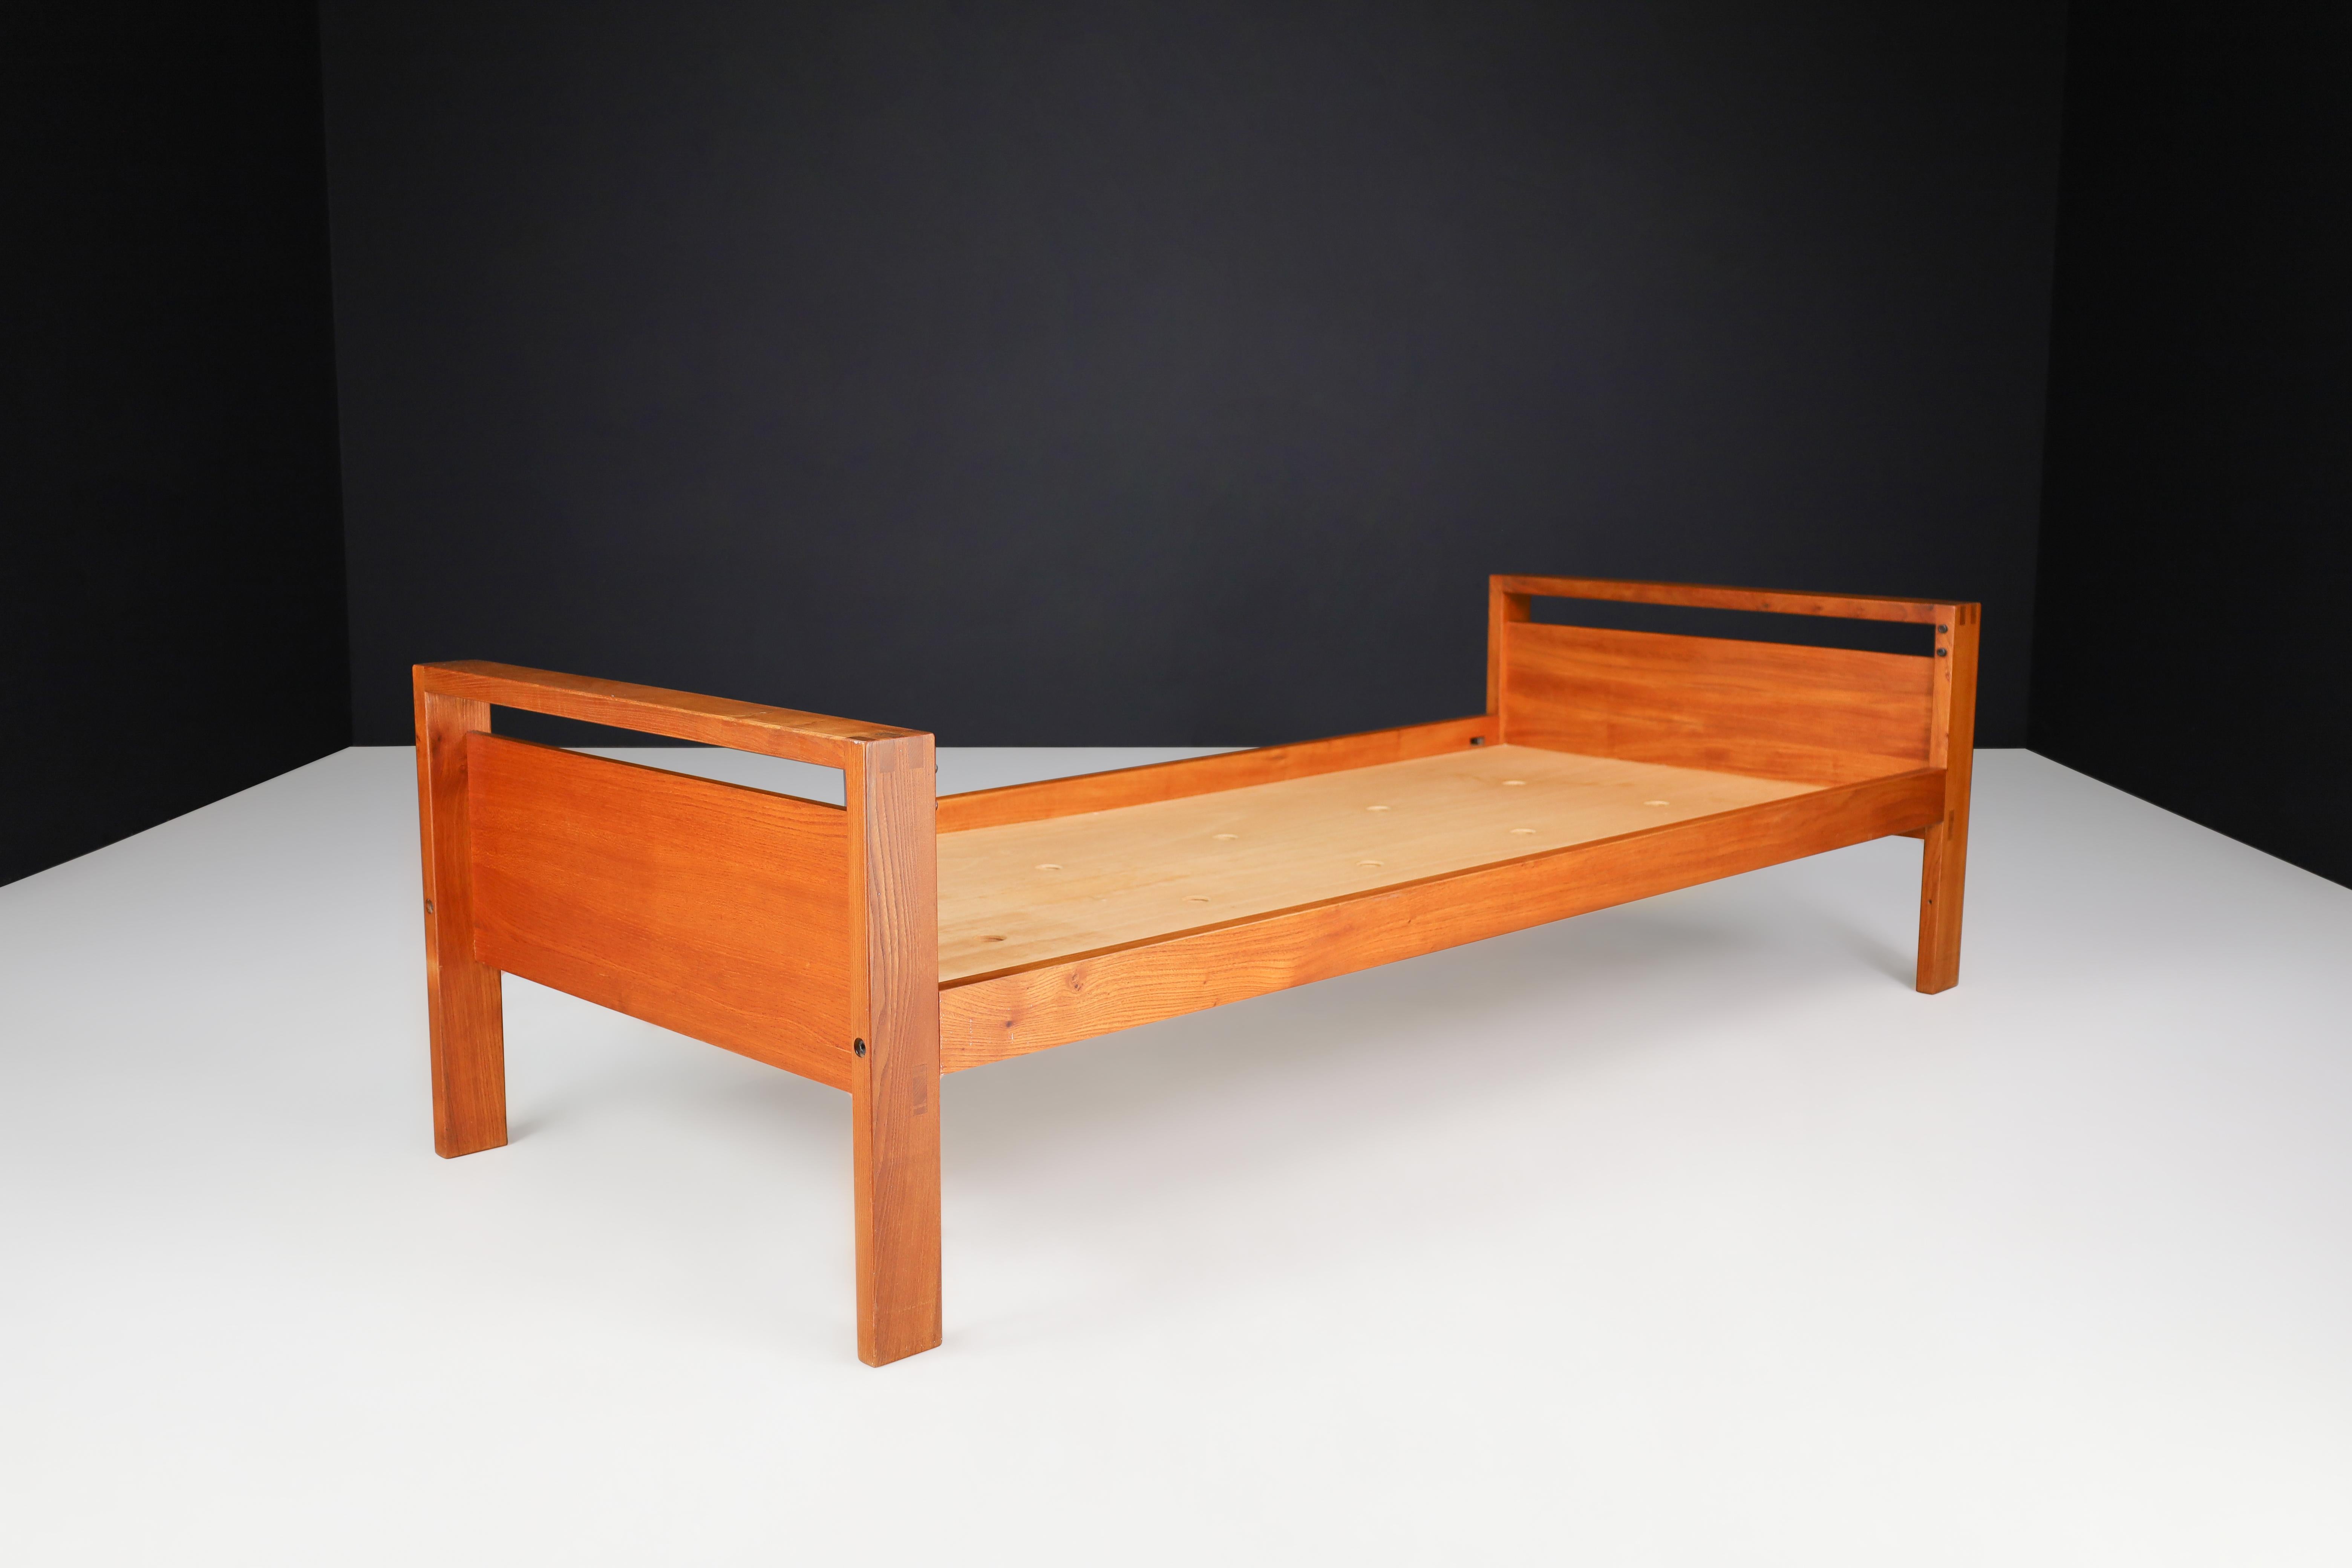 Midcentury Pierre Chapo LO6A Bed, Daybed in Elm Wood, France, 1960s.

This bed or daybed model L06A was made from solid elm and designed by Pierre Chapo in the 1960s. The bed's solid elm structure has a beautiful color typical of the designer's